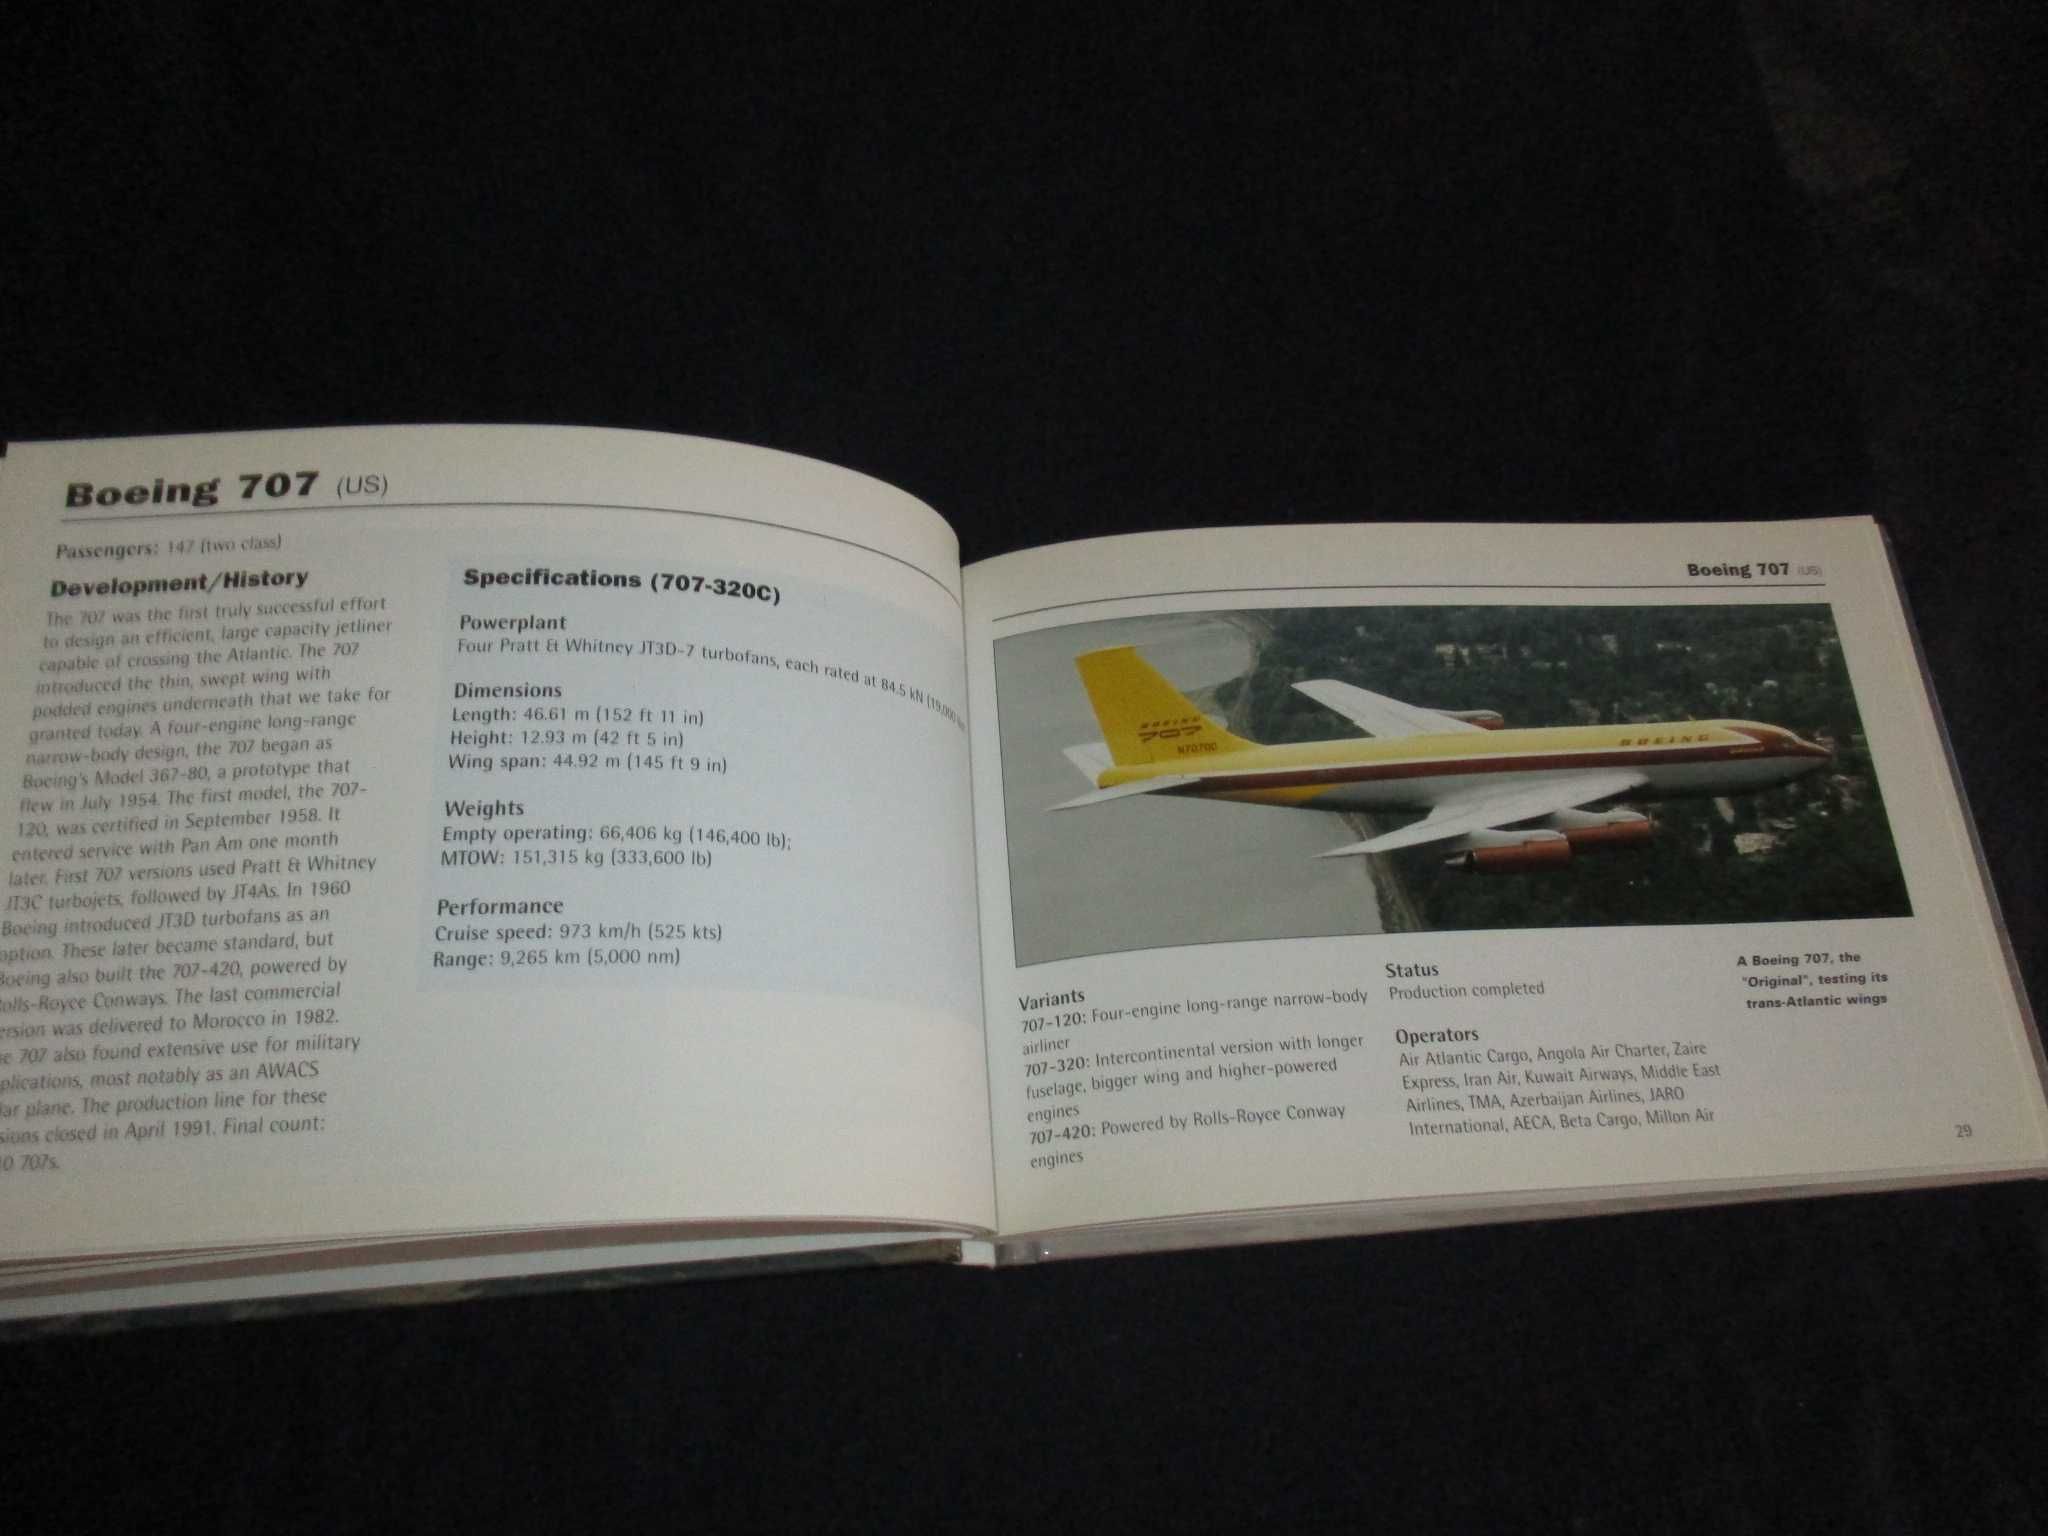 Livro Modern Airliners Jane's Pocket Guide